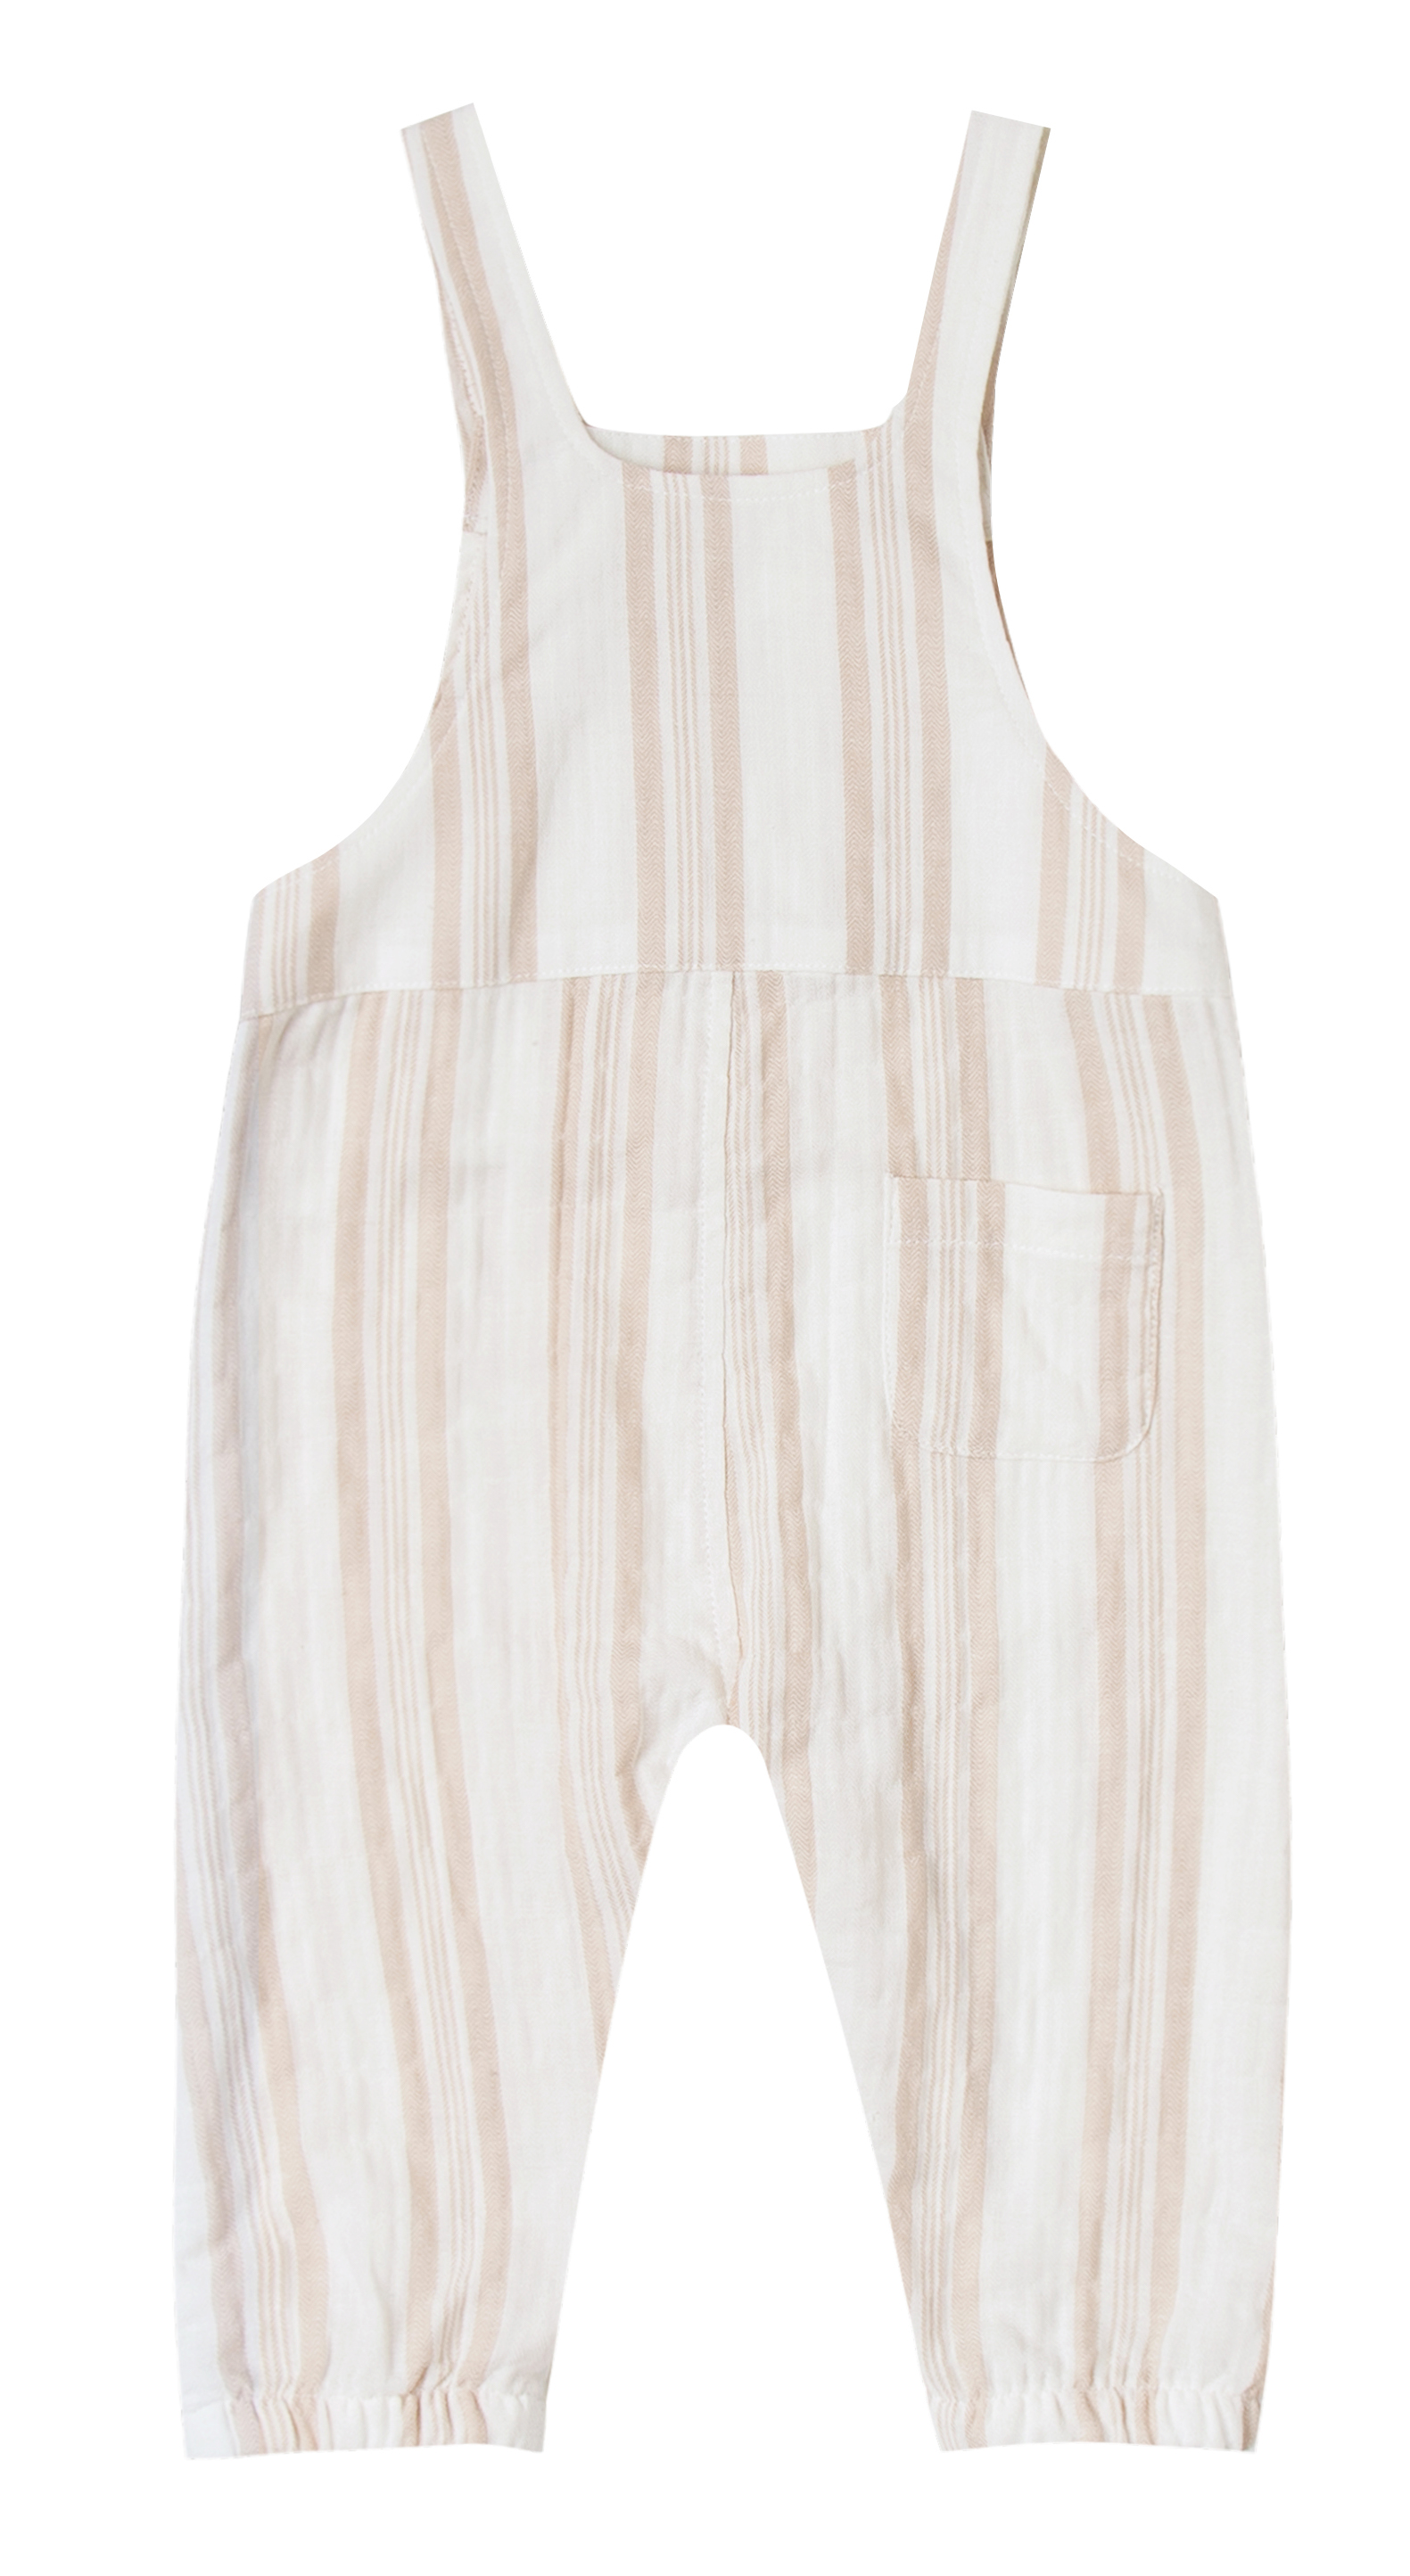                                                                                                                       Sand stripe baby overall  